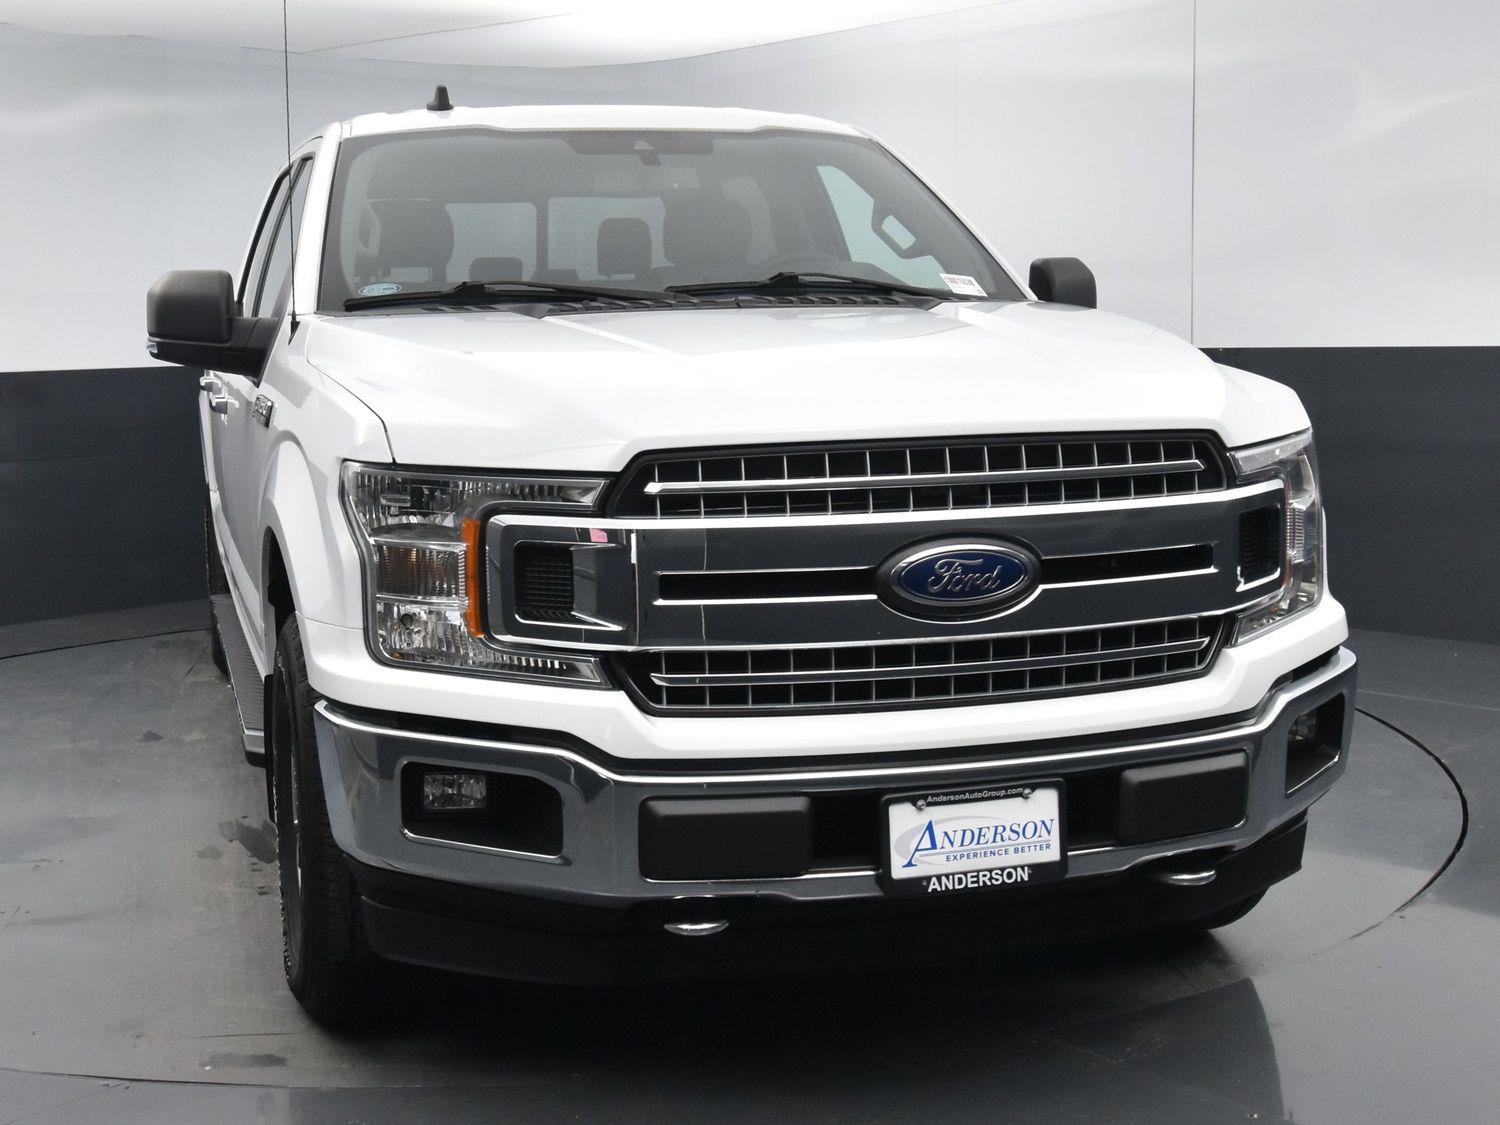 Used 2019 Ford F-150 XLT Crew Cab Truck for sale in Grand Island NE